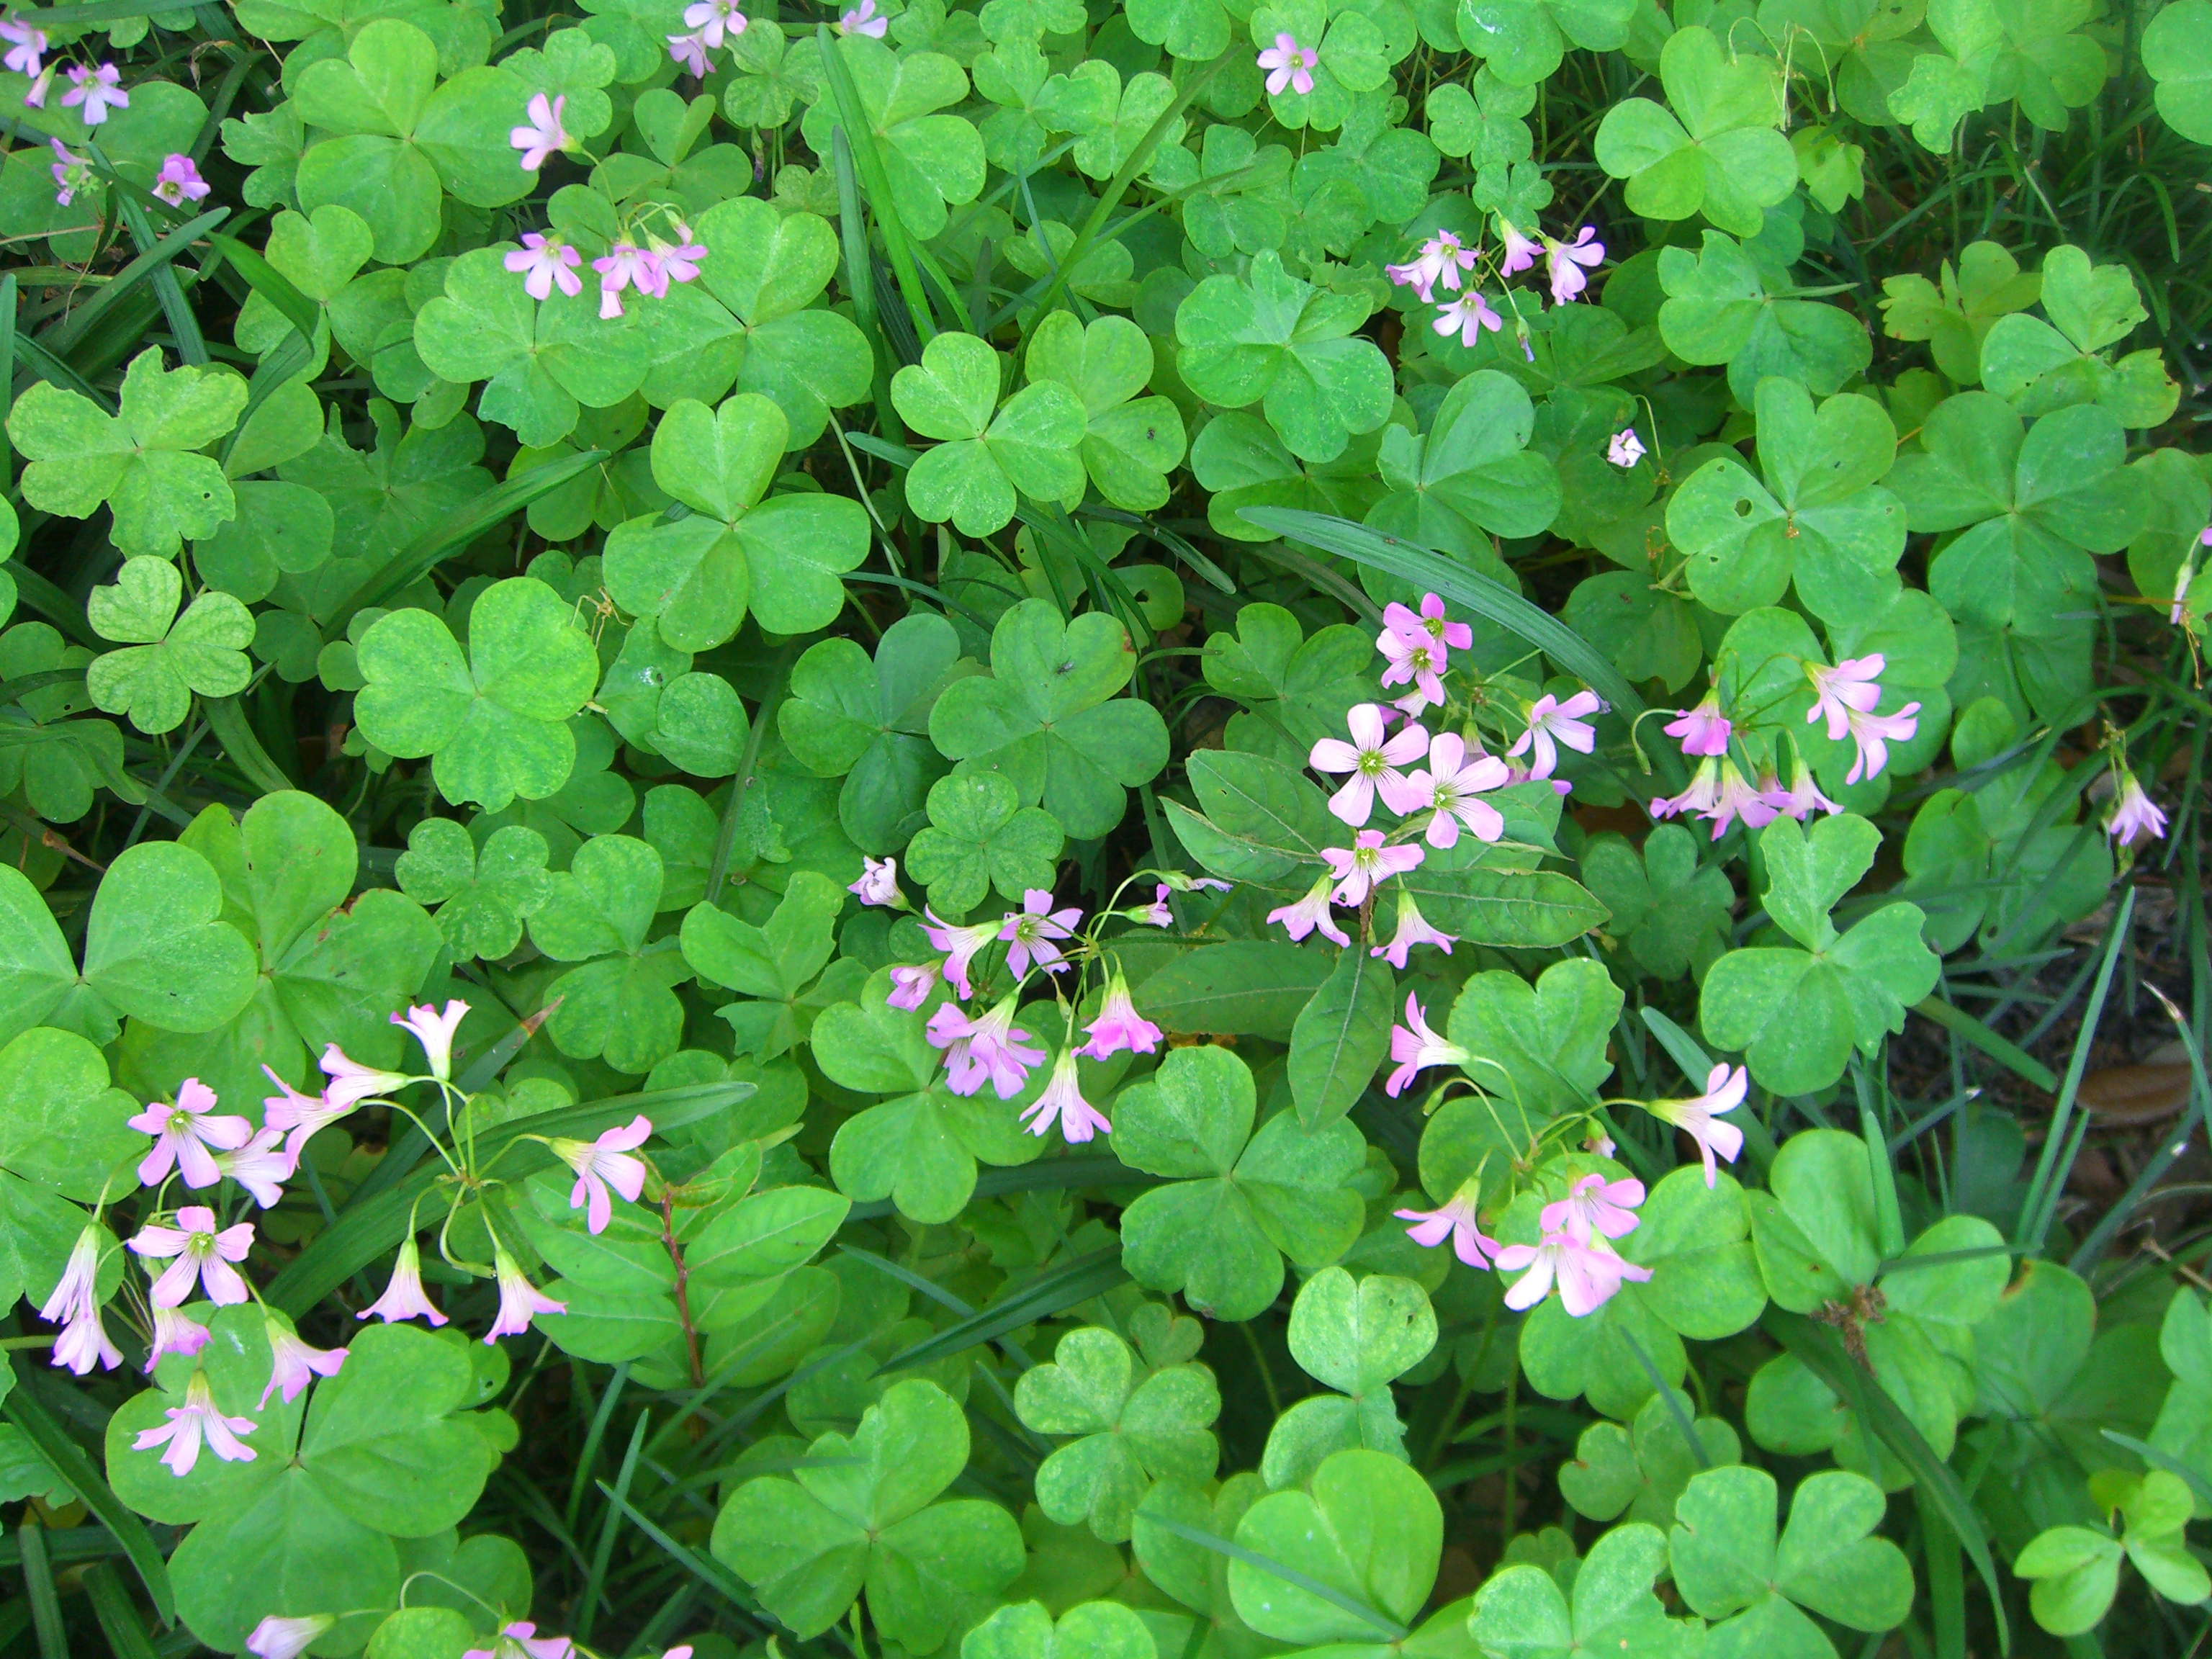 Clover: Weed or beautiful flower? | Green Pocket Protector